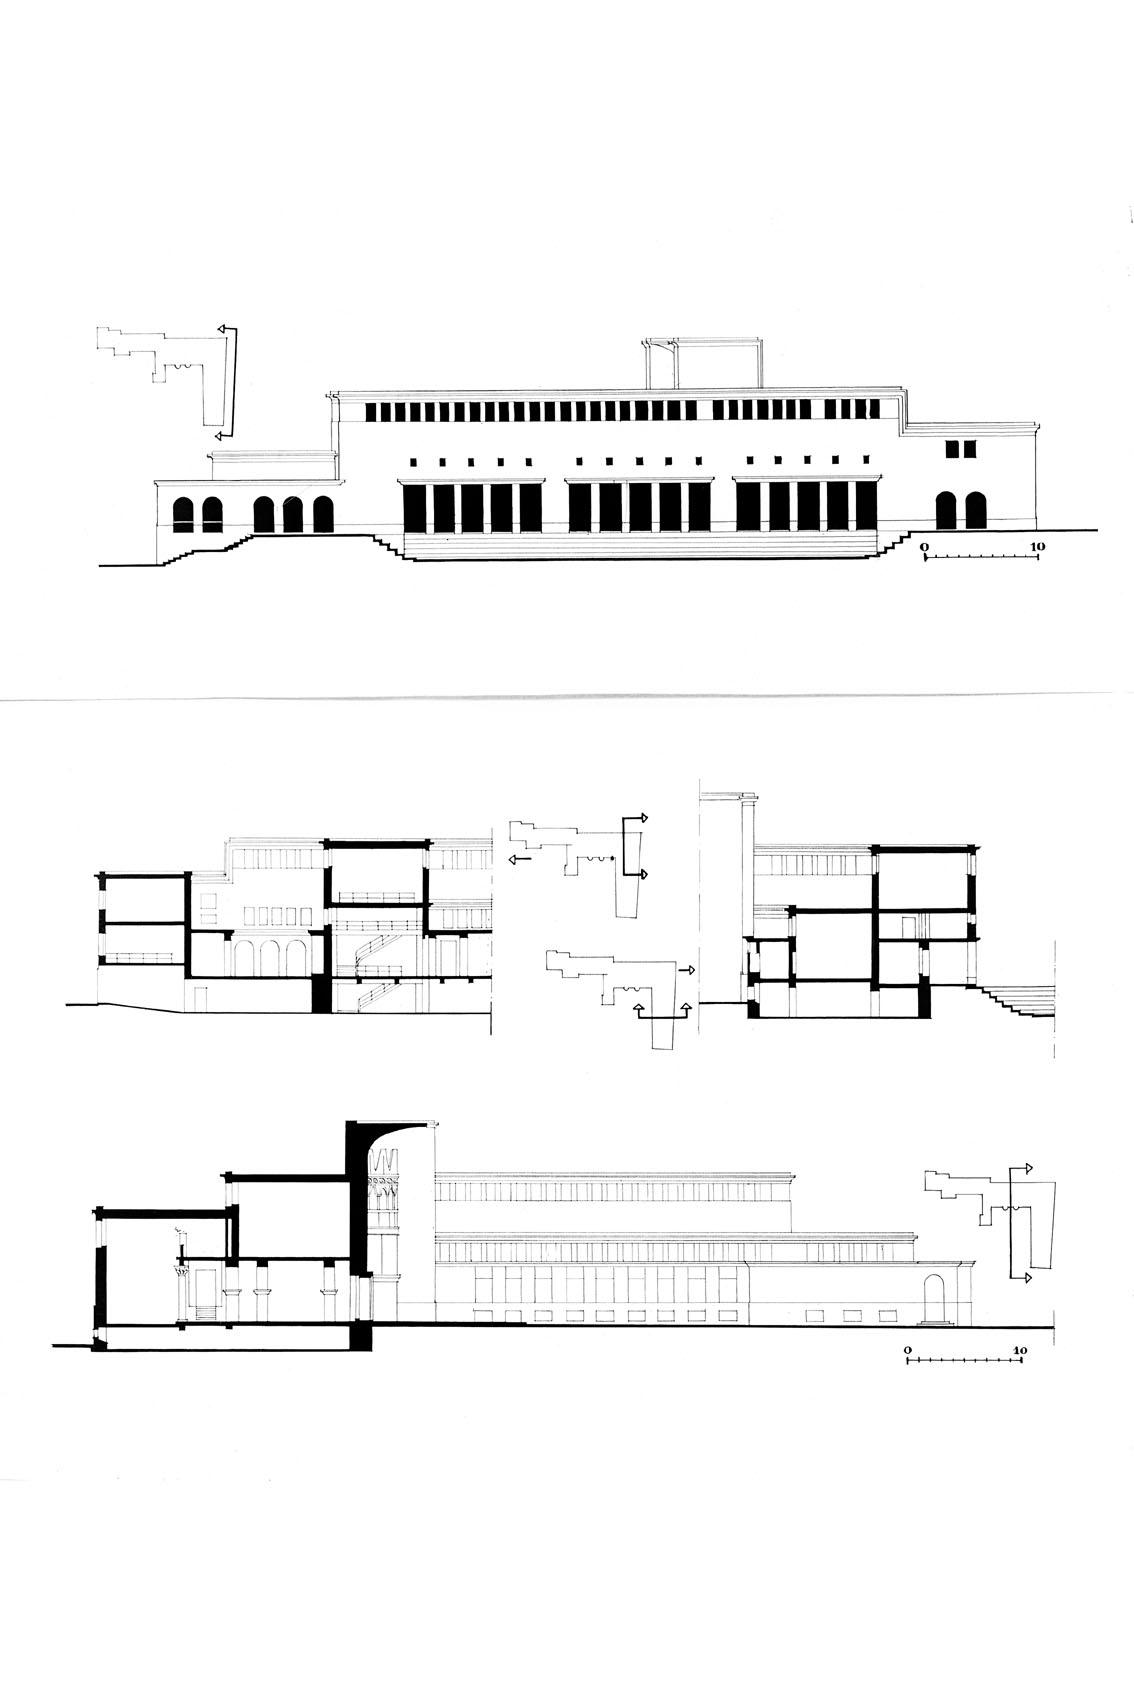 Plans, sections